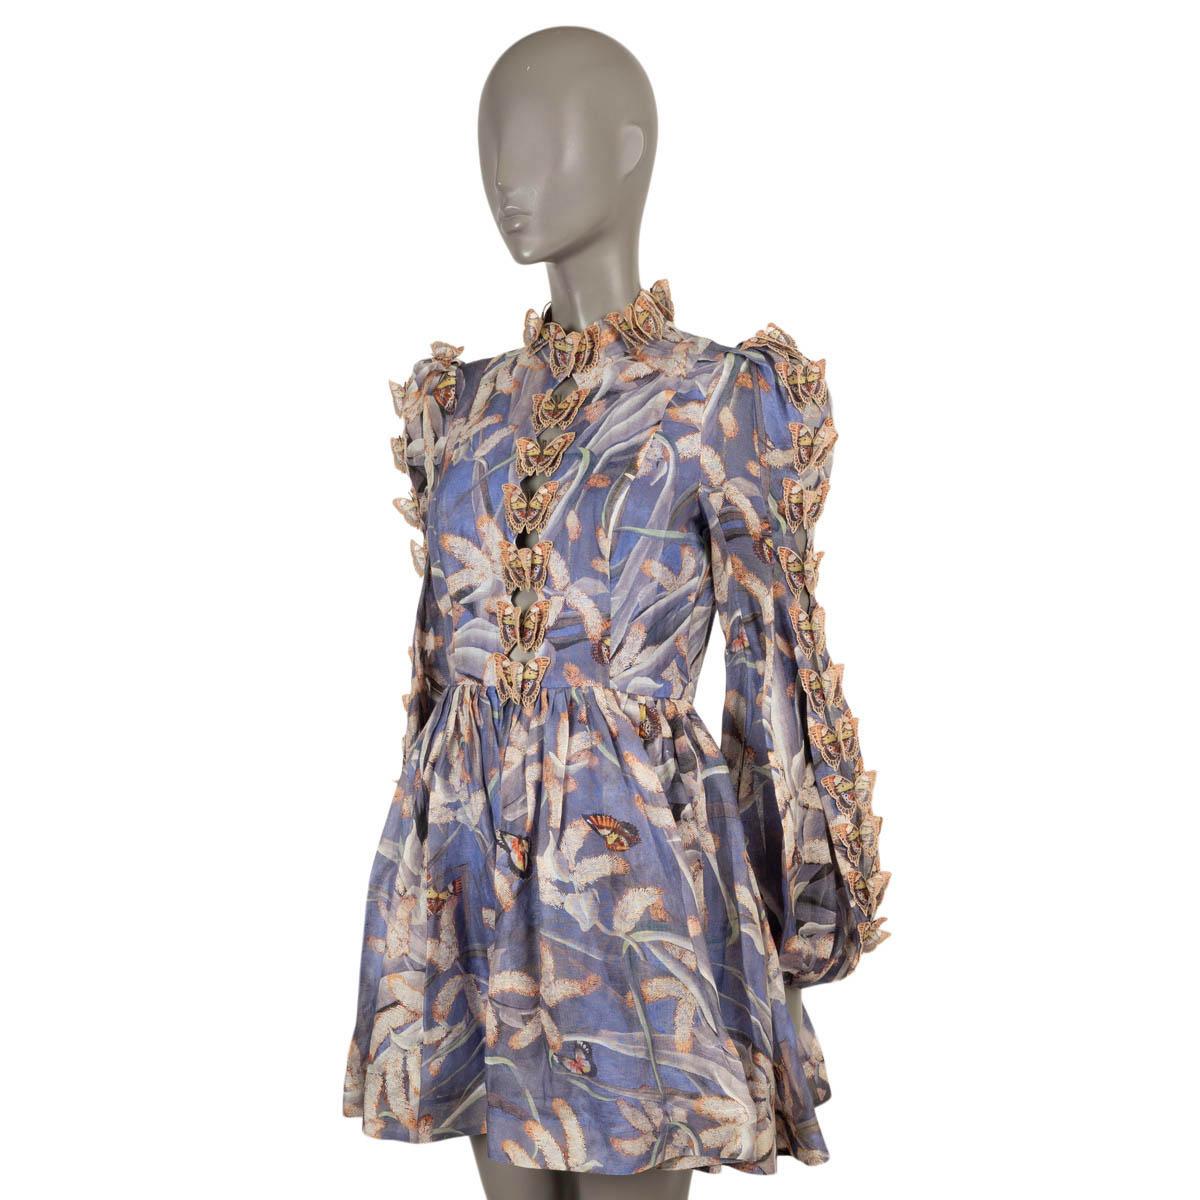 100% authentic Zimmermann Wild Botanica Butterfly mini dress in purple linen (52%) and silk (48%). Features a fit and flare silhouette, butterfly applications on the front and along the bishop sleeves. Opens with a concealed zipper in the back and